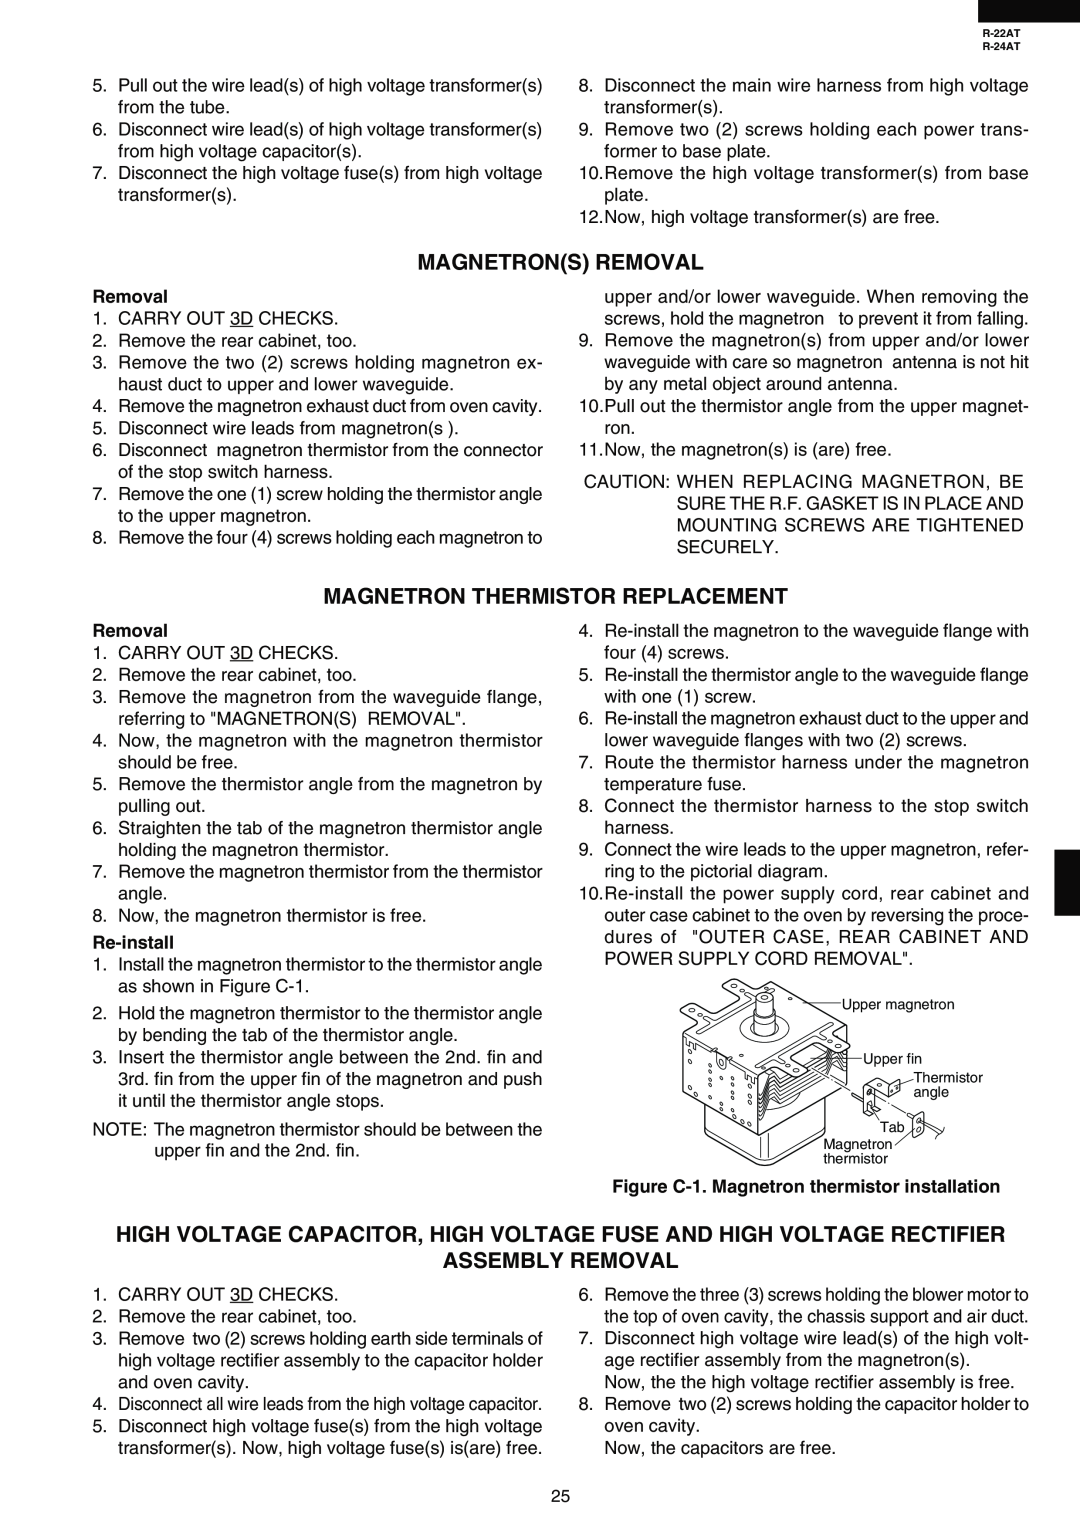 Sharp R-22AT, R-24AT service manual Magnetrons Removal, Magnetron Thermistor Replacement, Assembly Removal, Re-install 